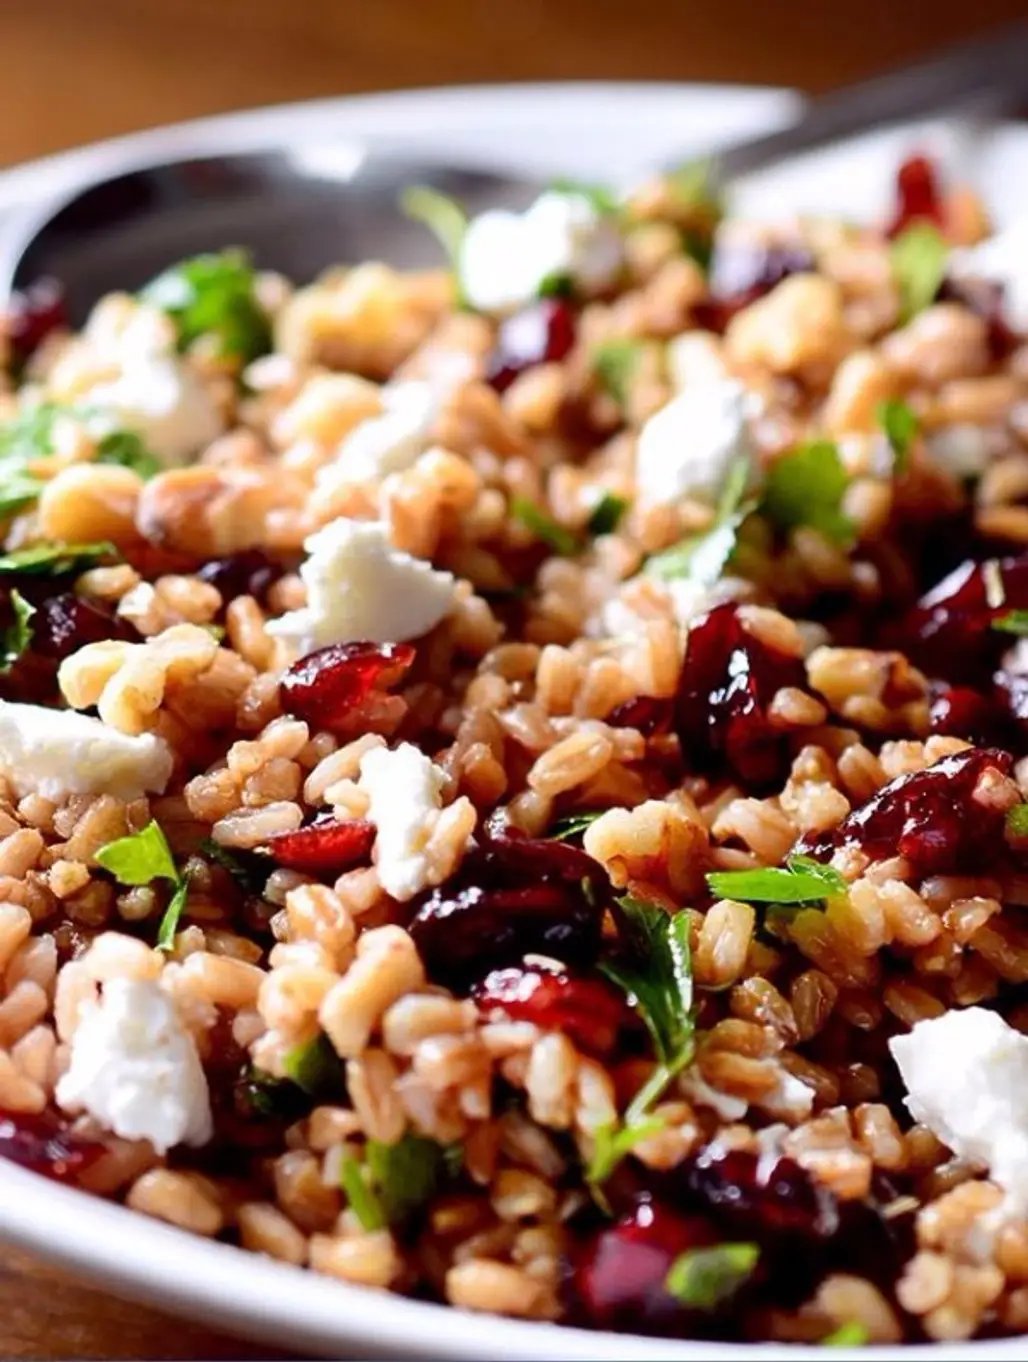 Ahearty Salad with Farro, Cranberries and Goat Cheese All Tossed in a Tangy Balsamic Vinaigrette